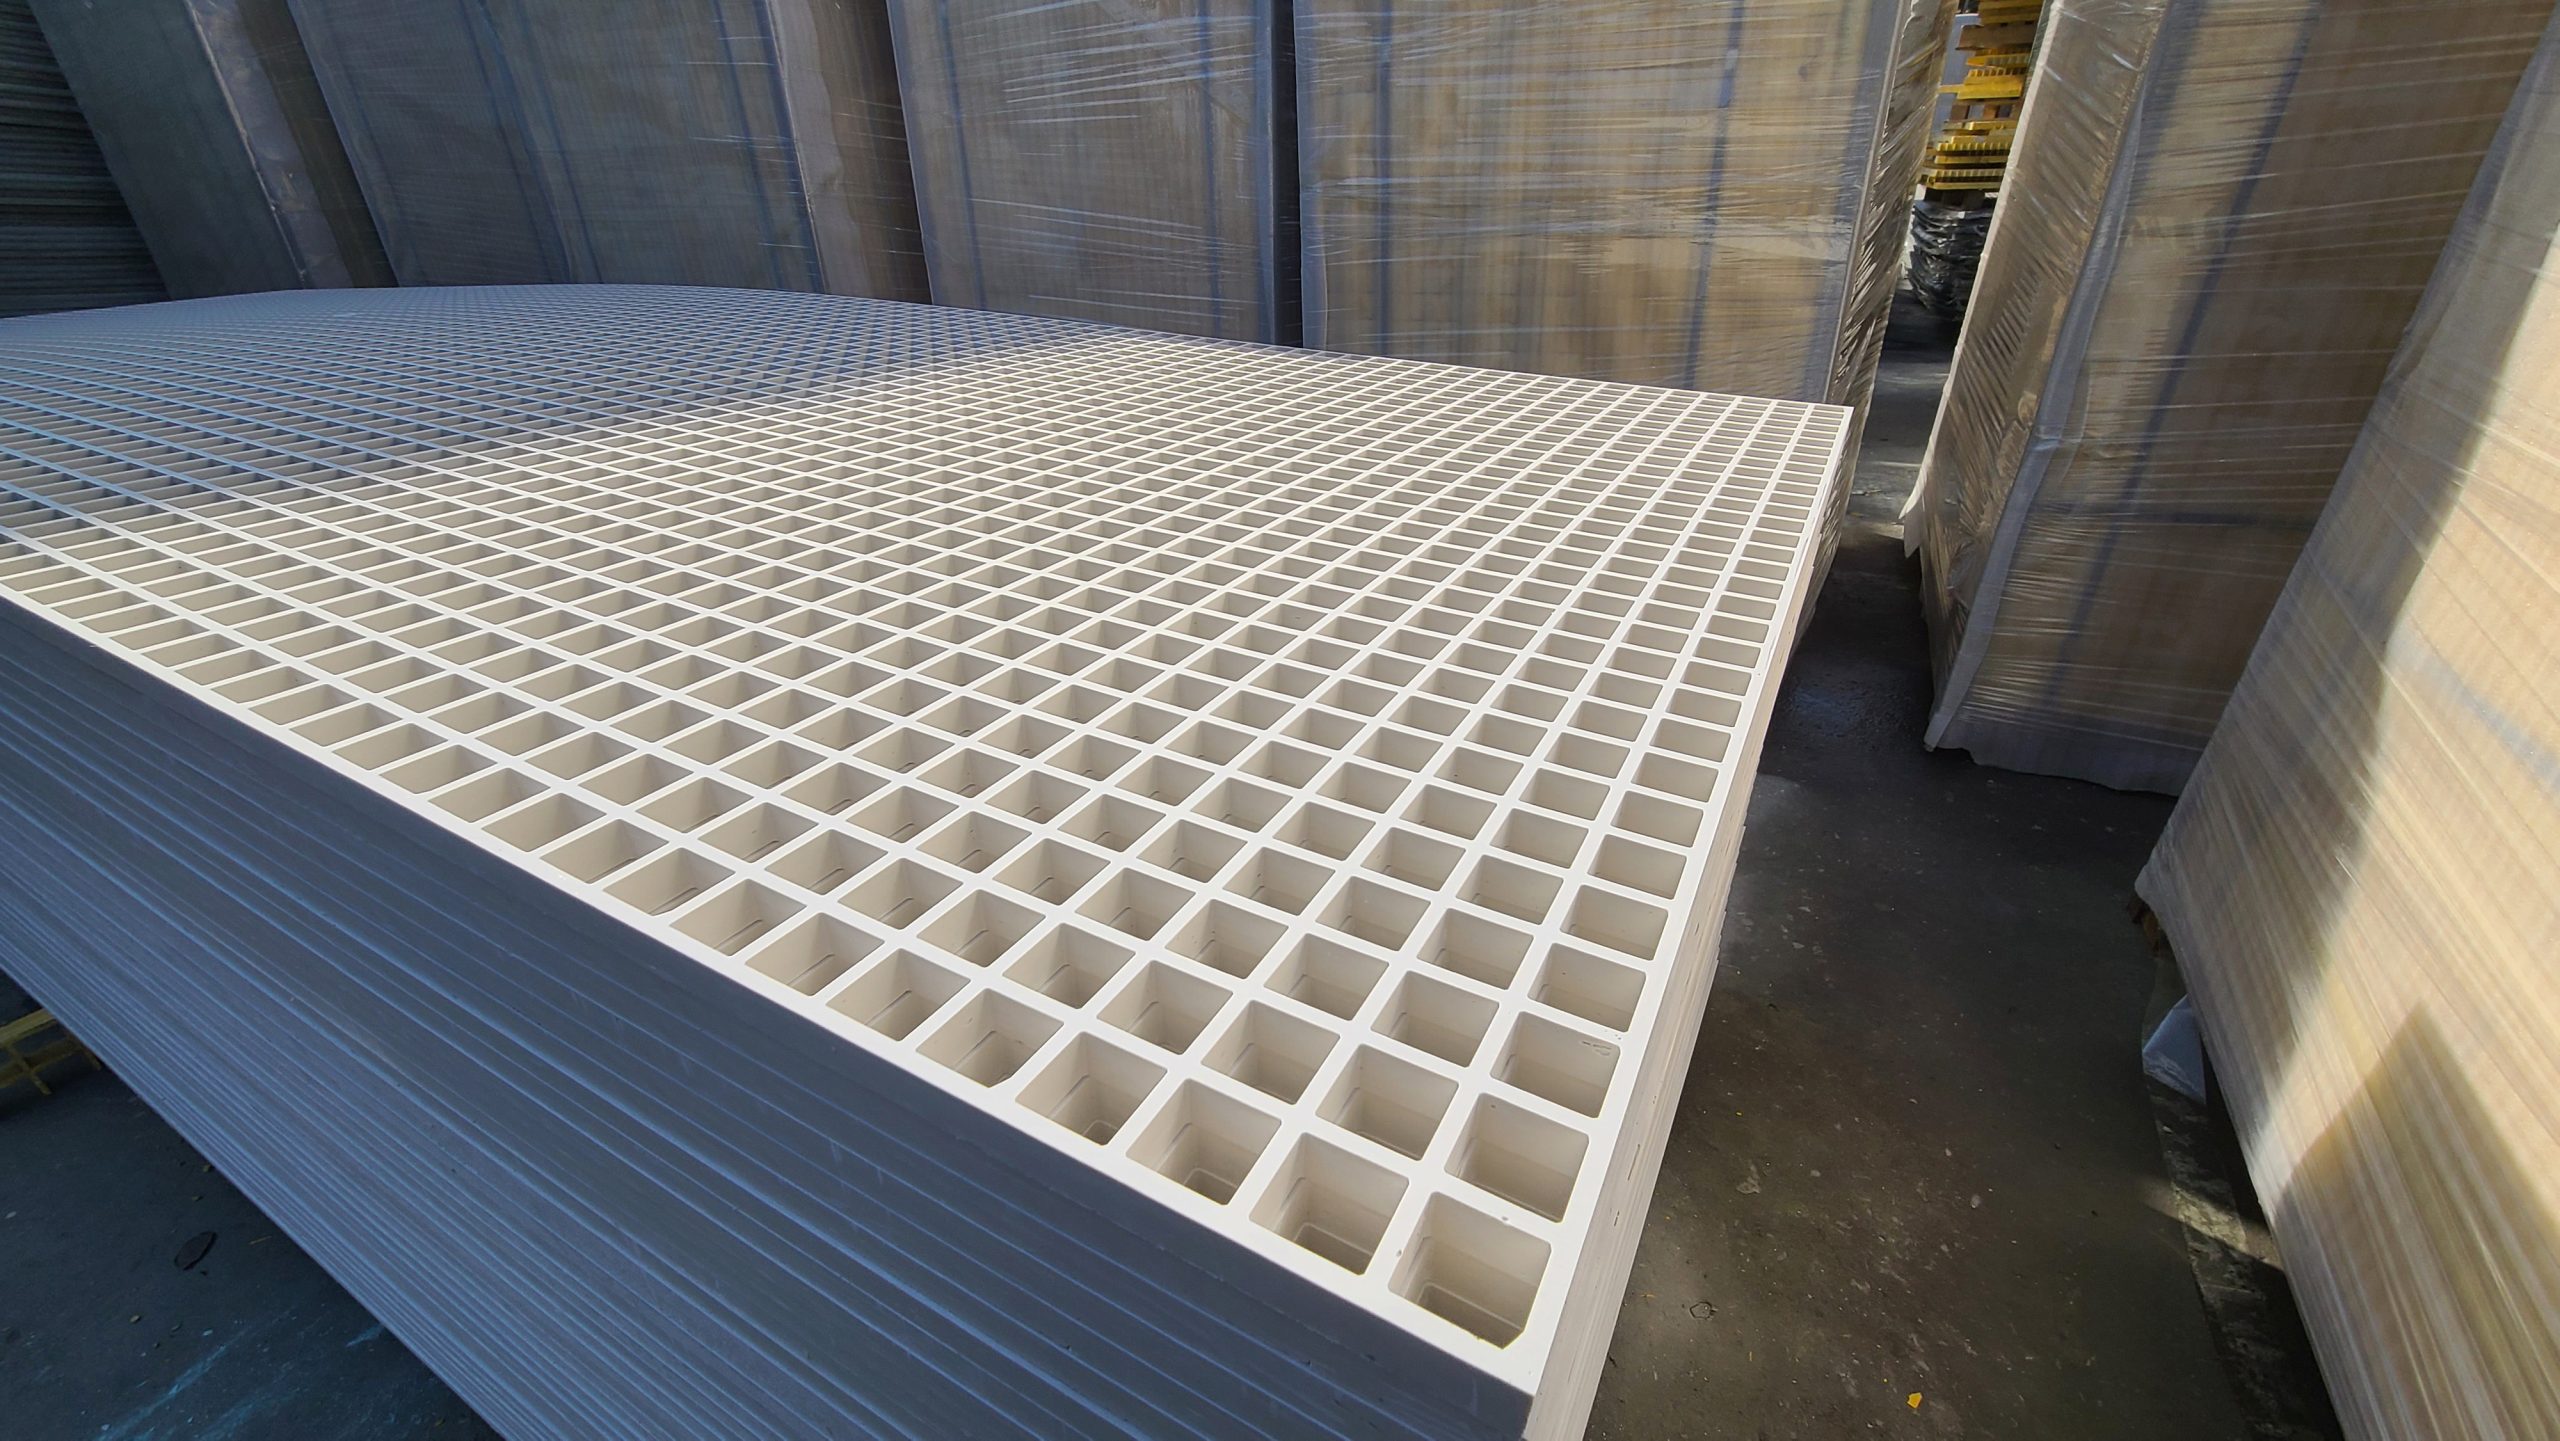 Application Of FRP Grating For Walkway In PV Industry